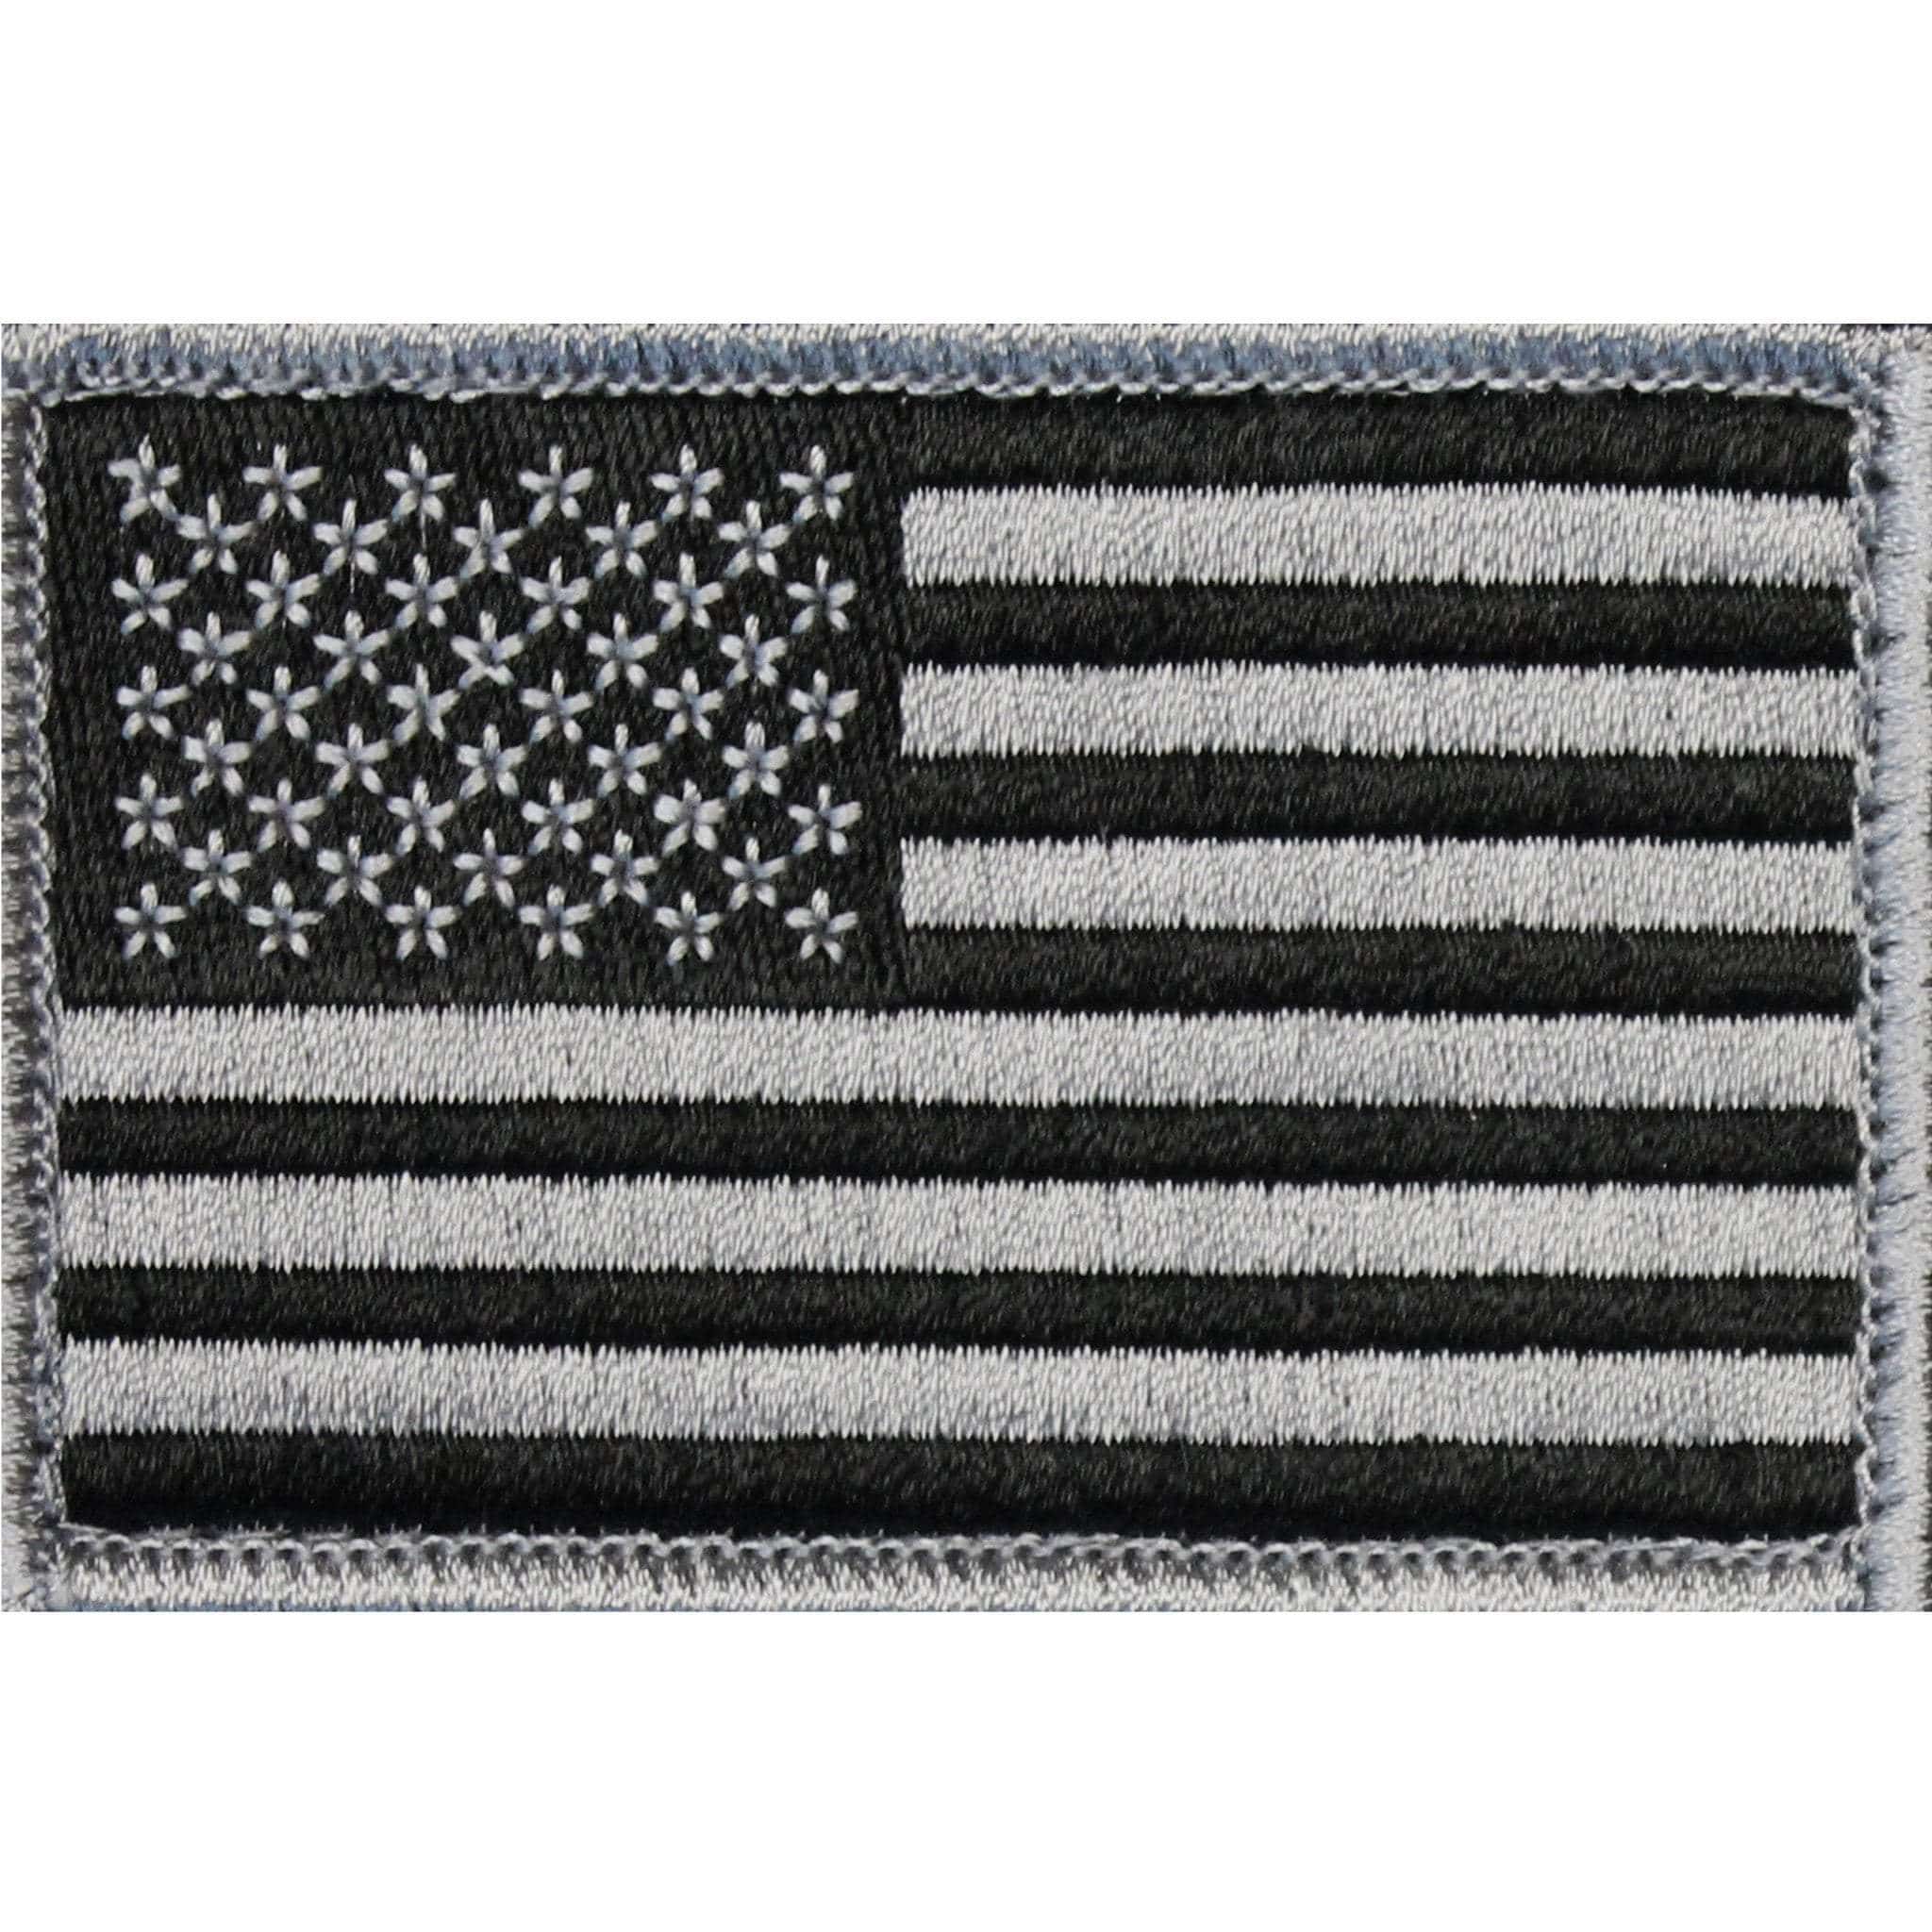 Personalized velcro patch (one patch) 2''x 8''.